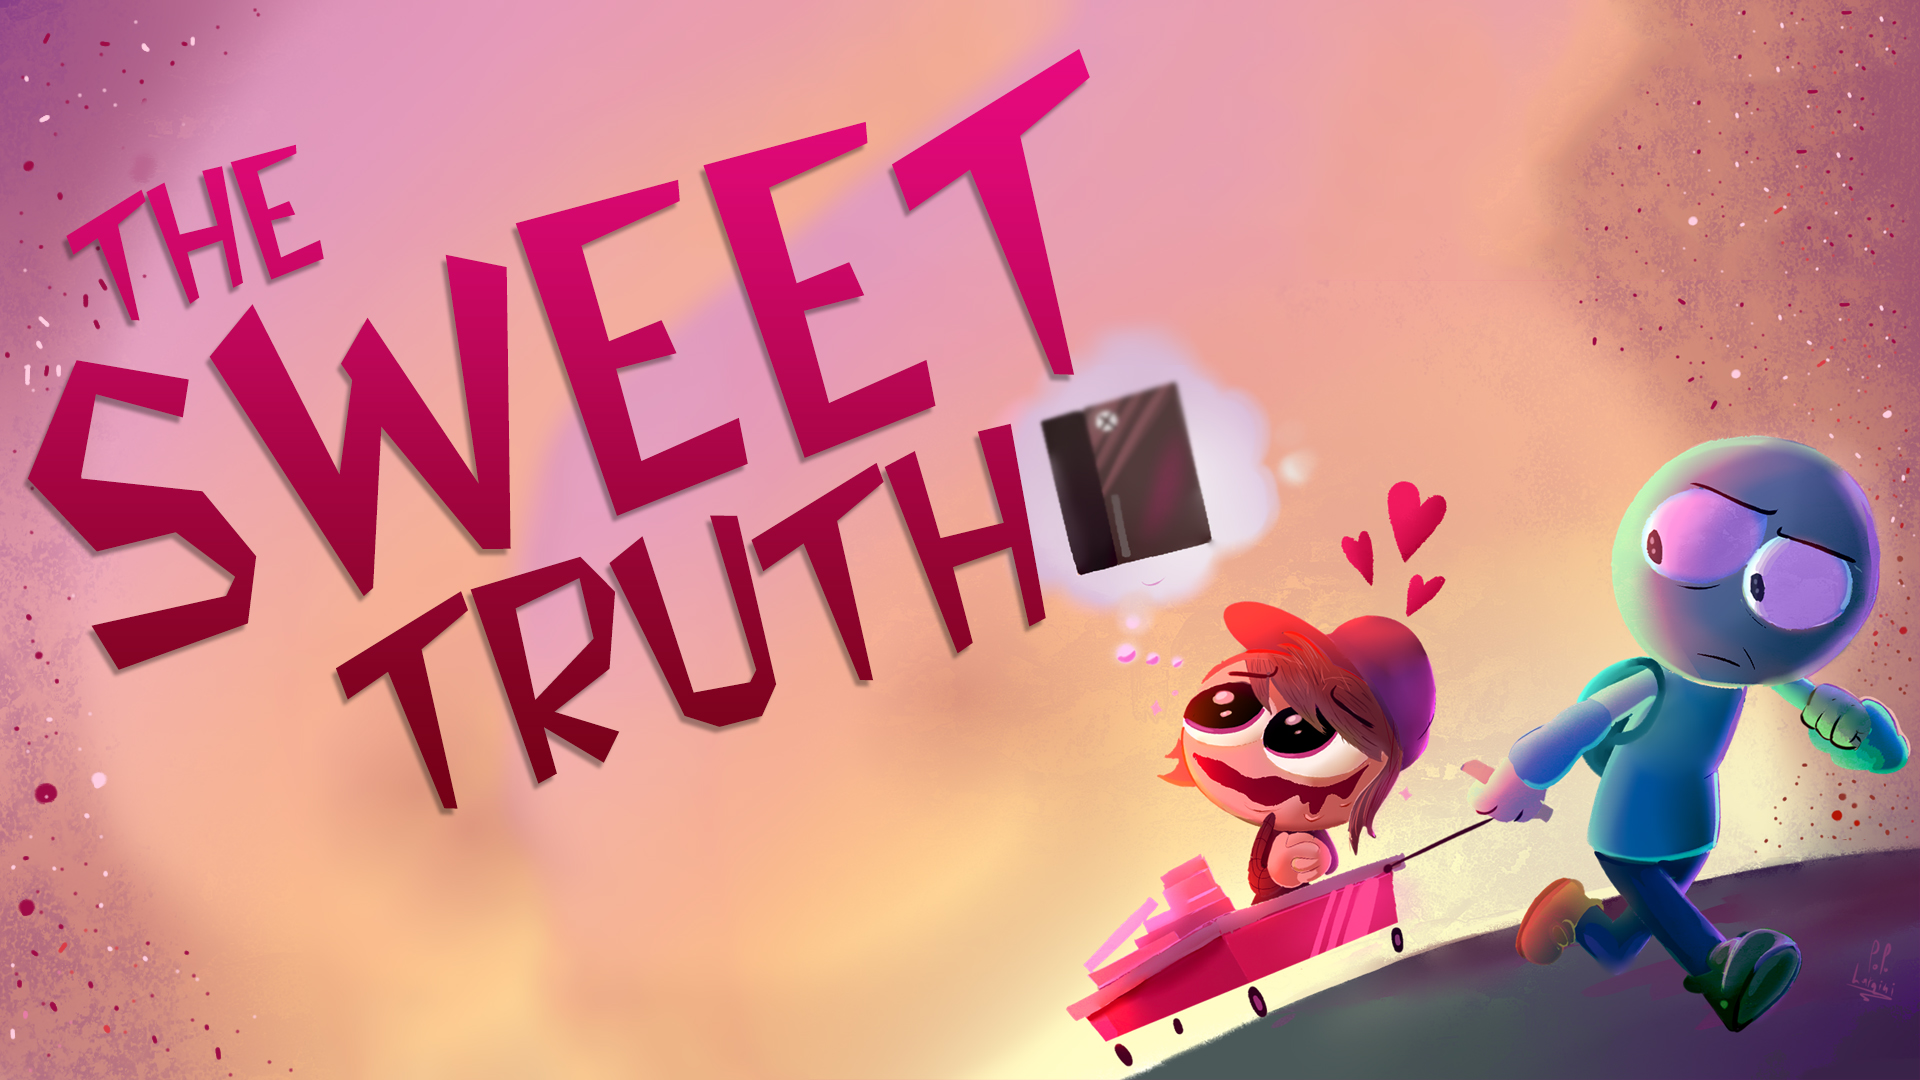 The Sweet Truth